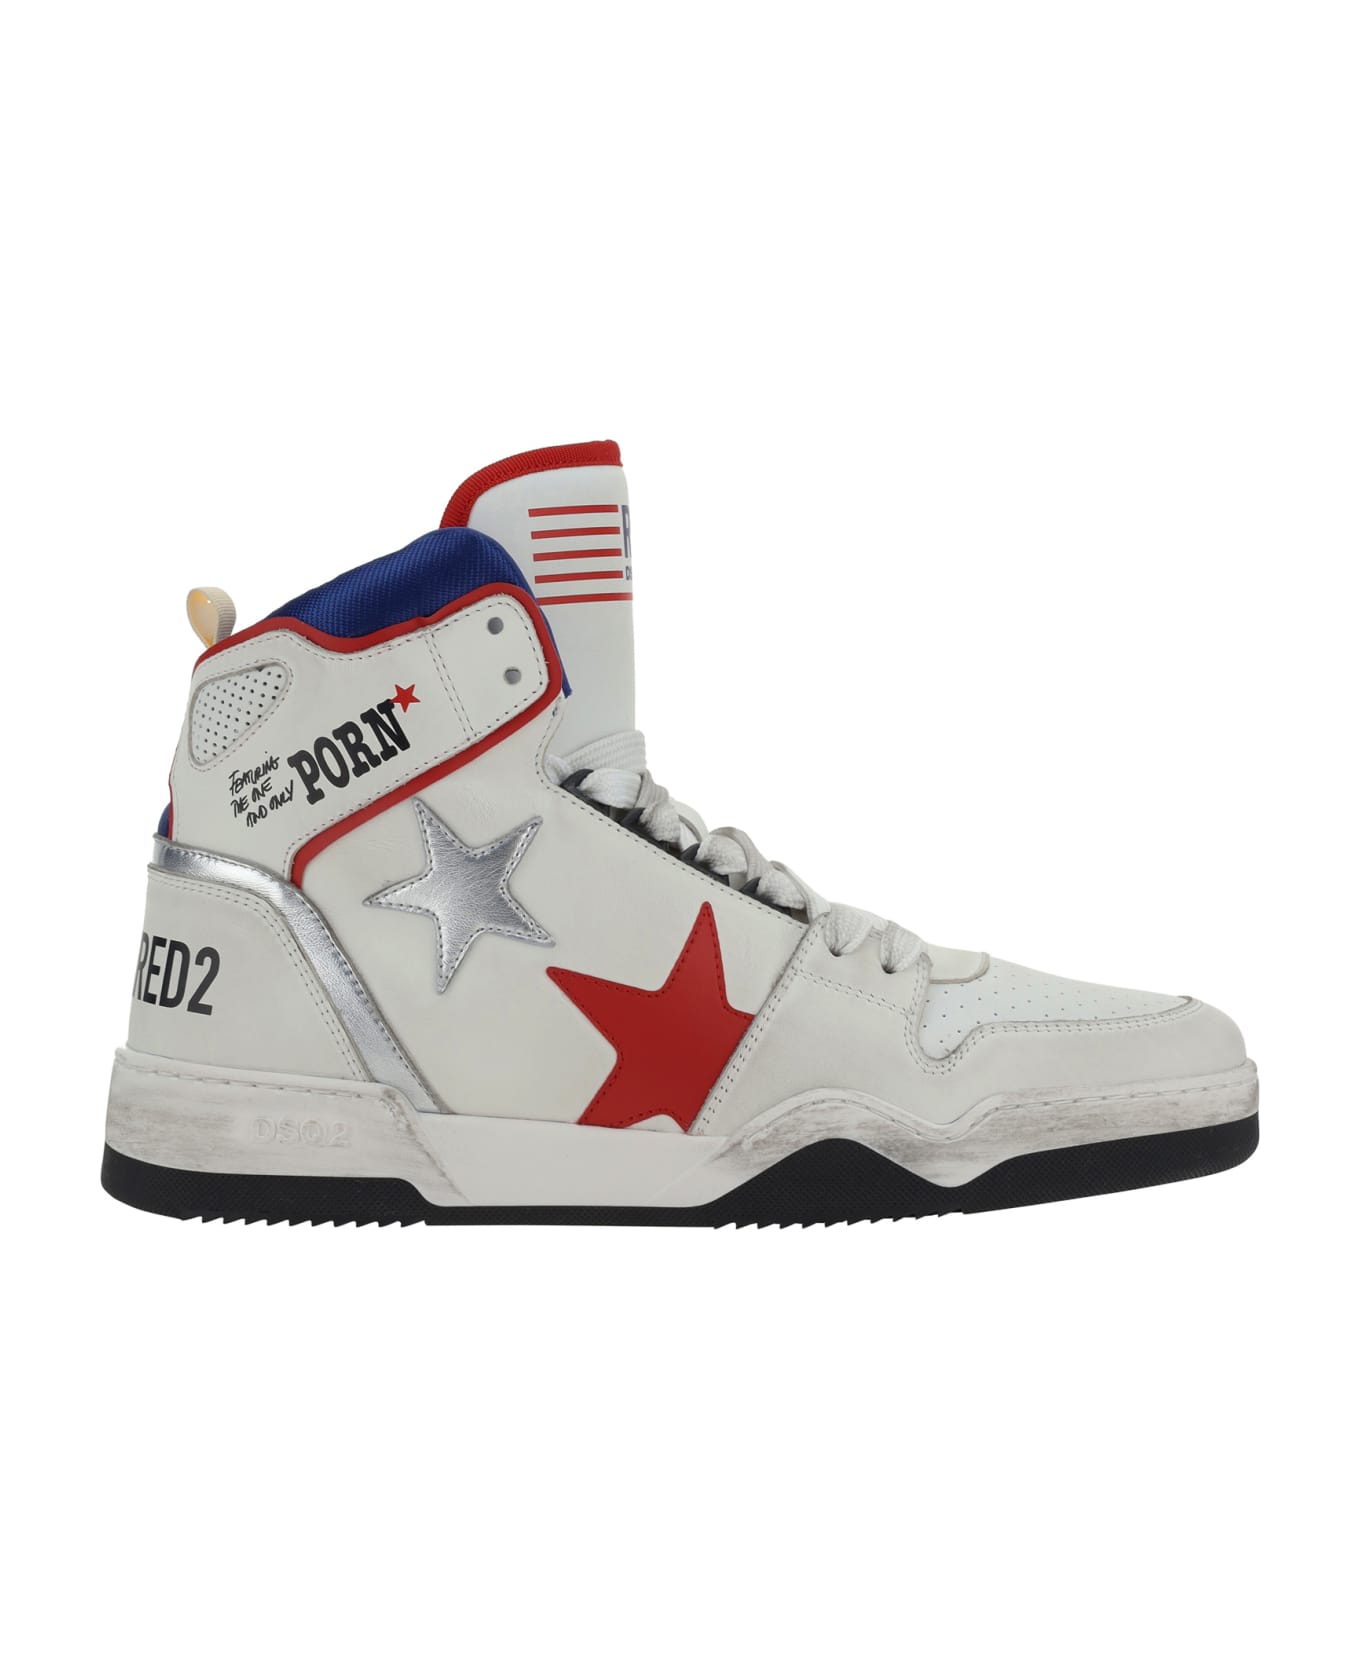 Dsquared2 Spiker High-top Sneakers - Bianco+rosso+blu スニーカー